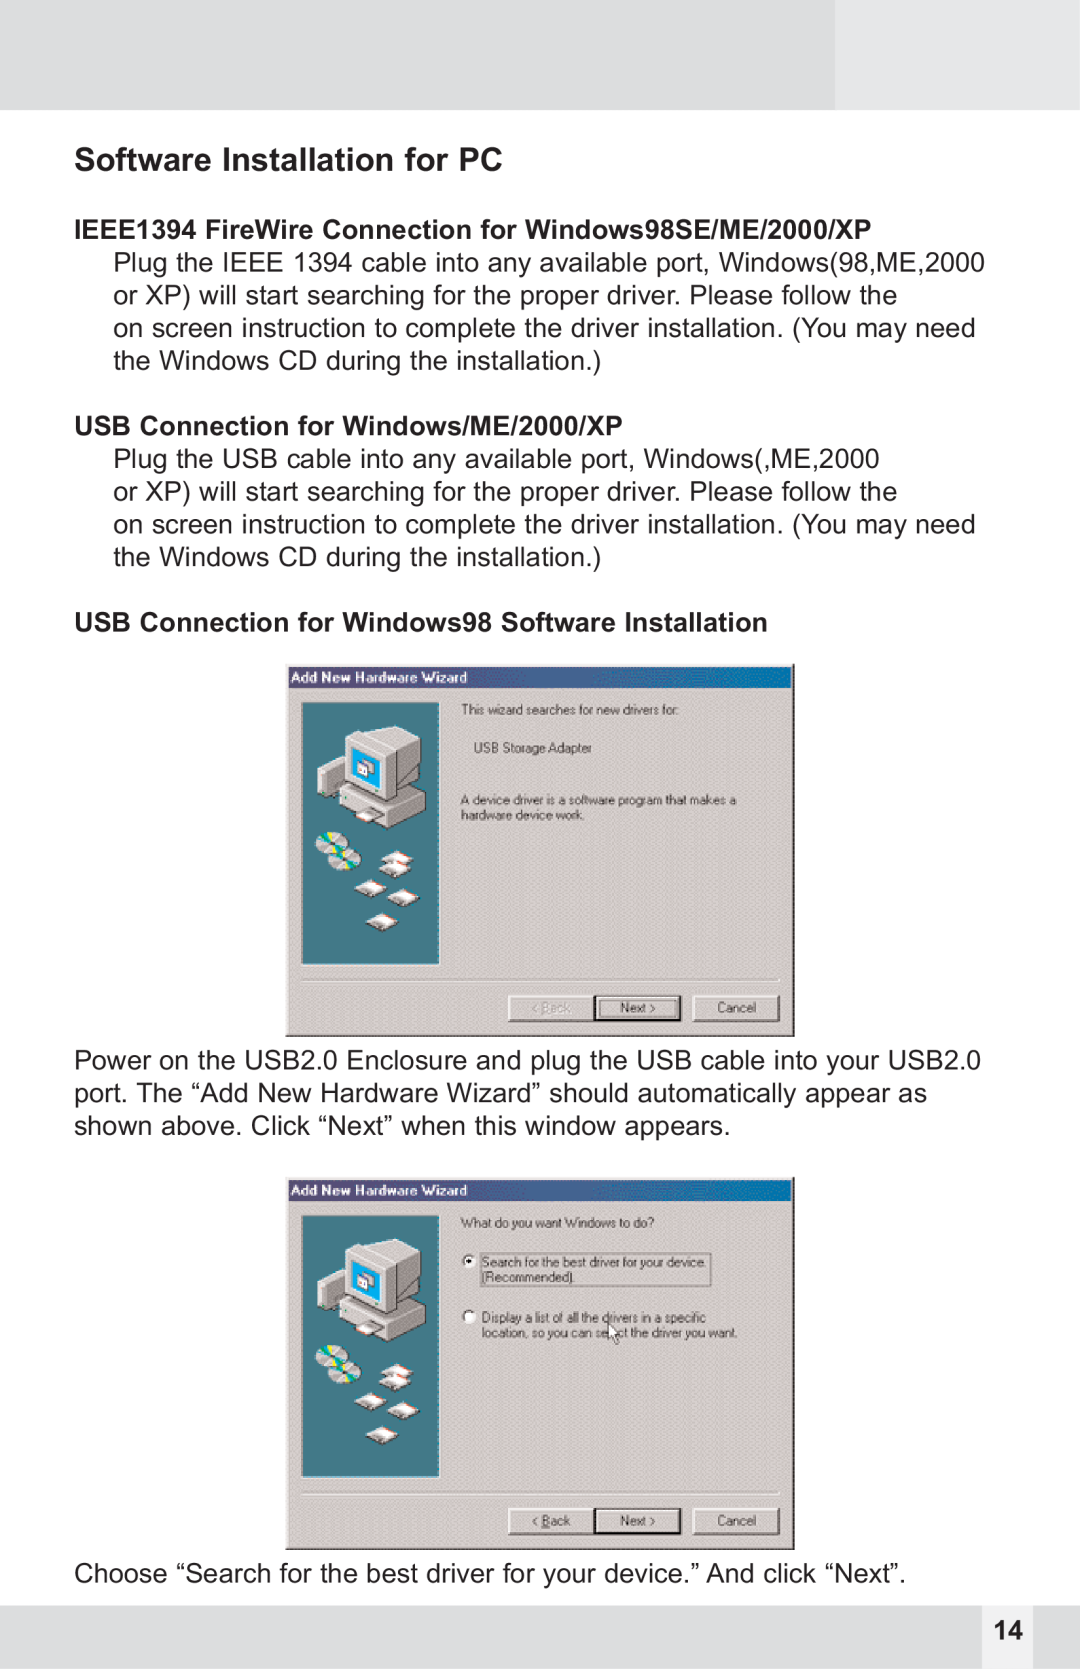 Macally PHR-250CE user manual Software Installation for PC, IEEE1394 FireWire Connection for Windows98SE/ME/2000/XP 